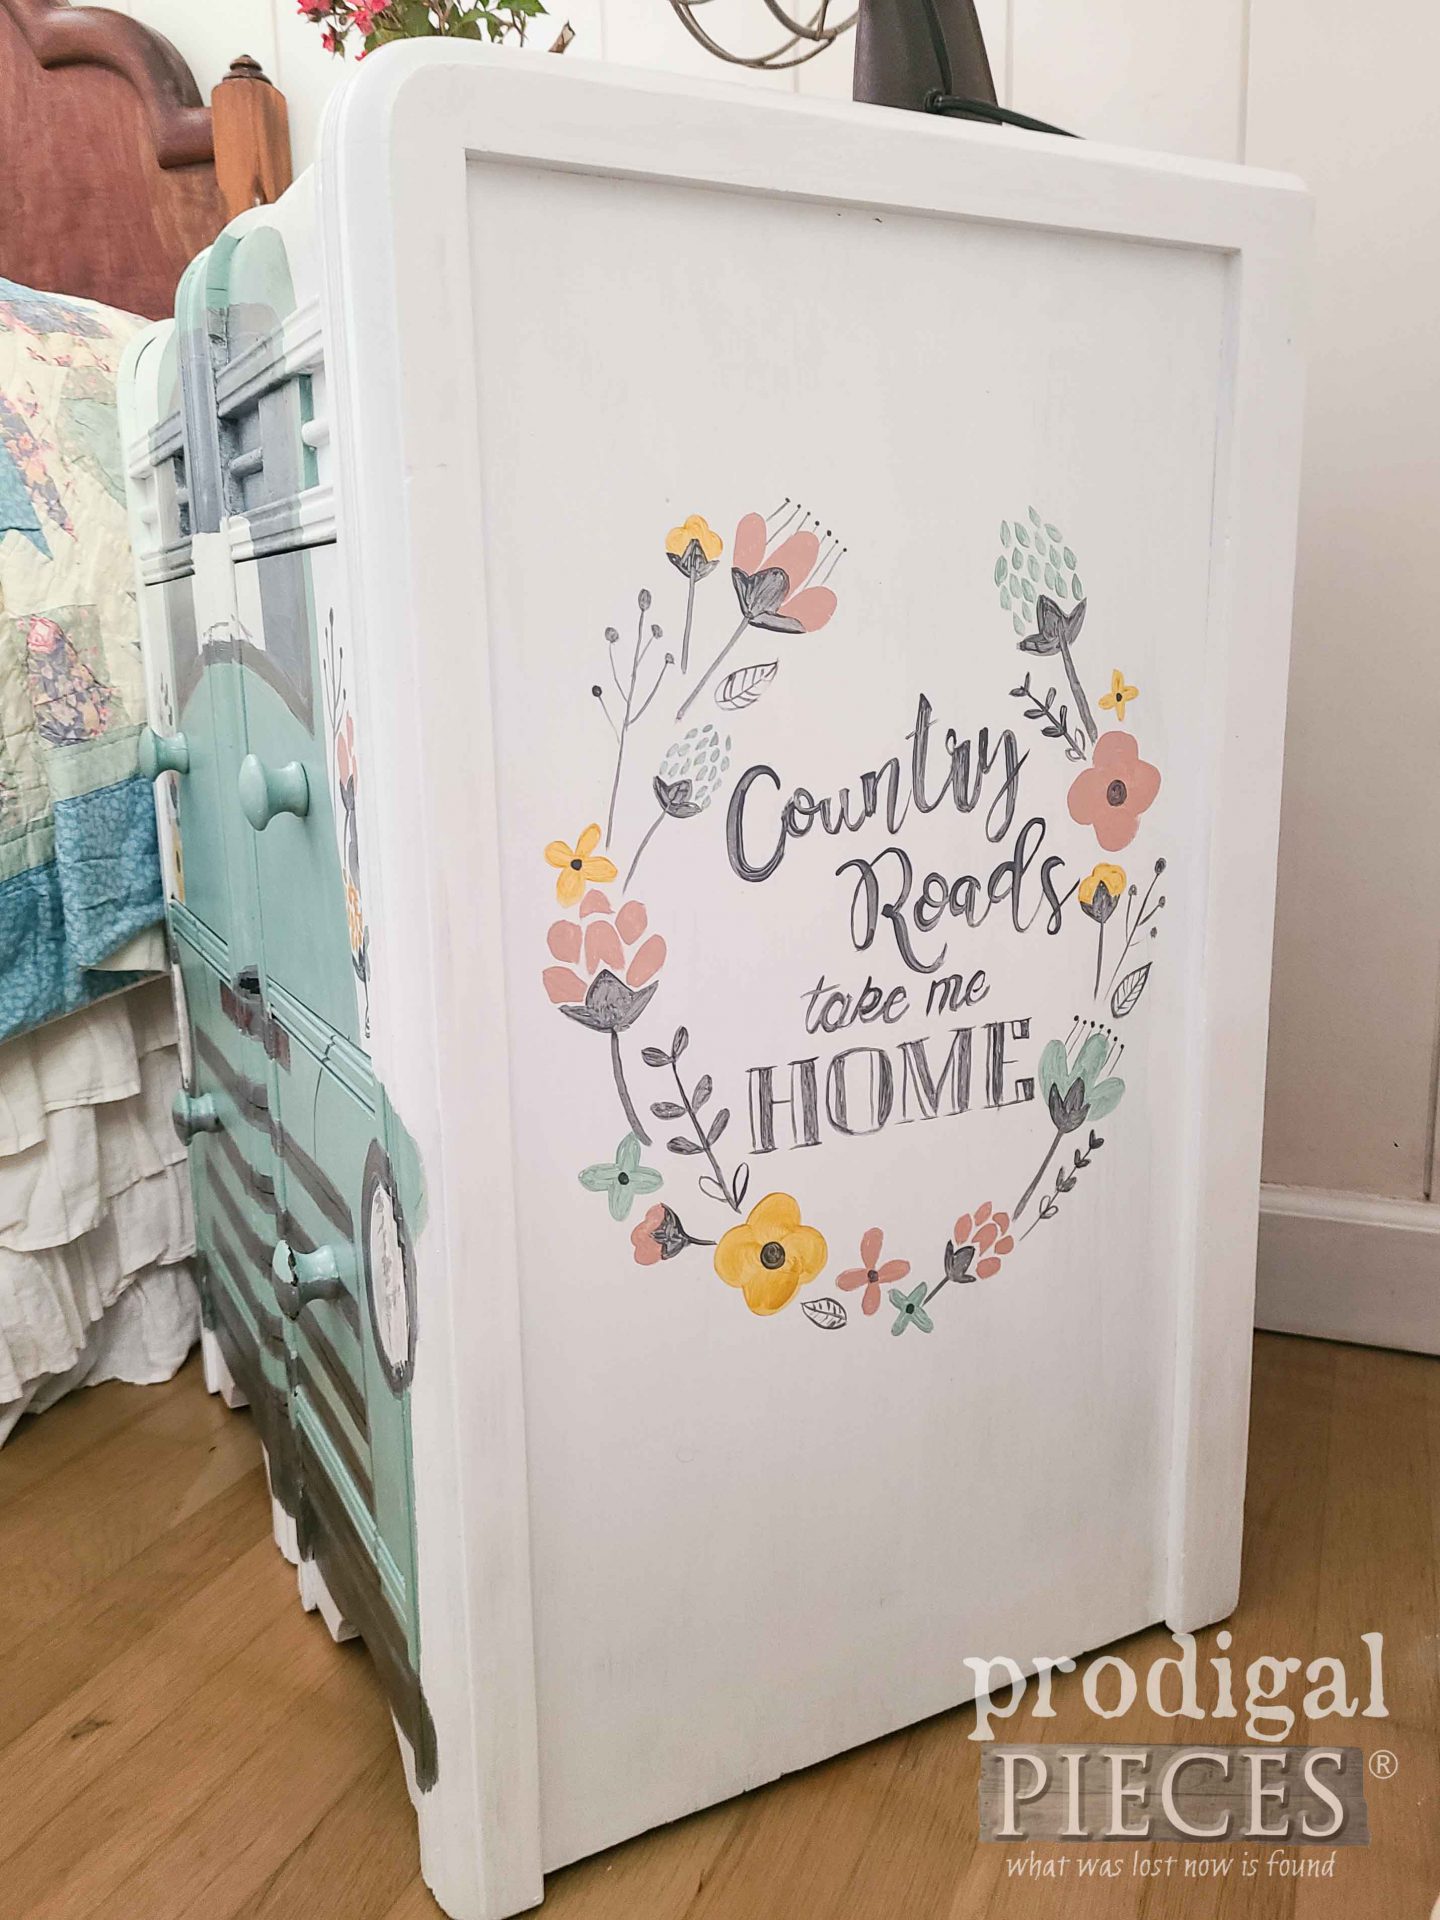 Country Roads Take Me Home Art on Chest of Drawers by Larissa of Prodigal Pieces | prodigalpieces.com #prodigalpieces #handmade #furniture #repurposed